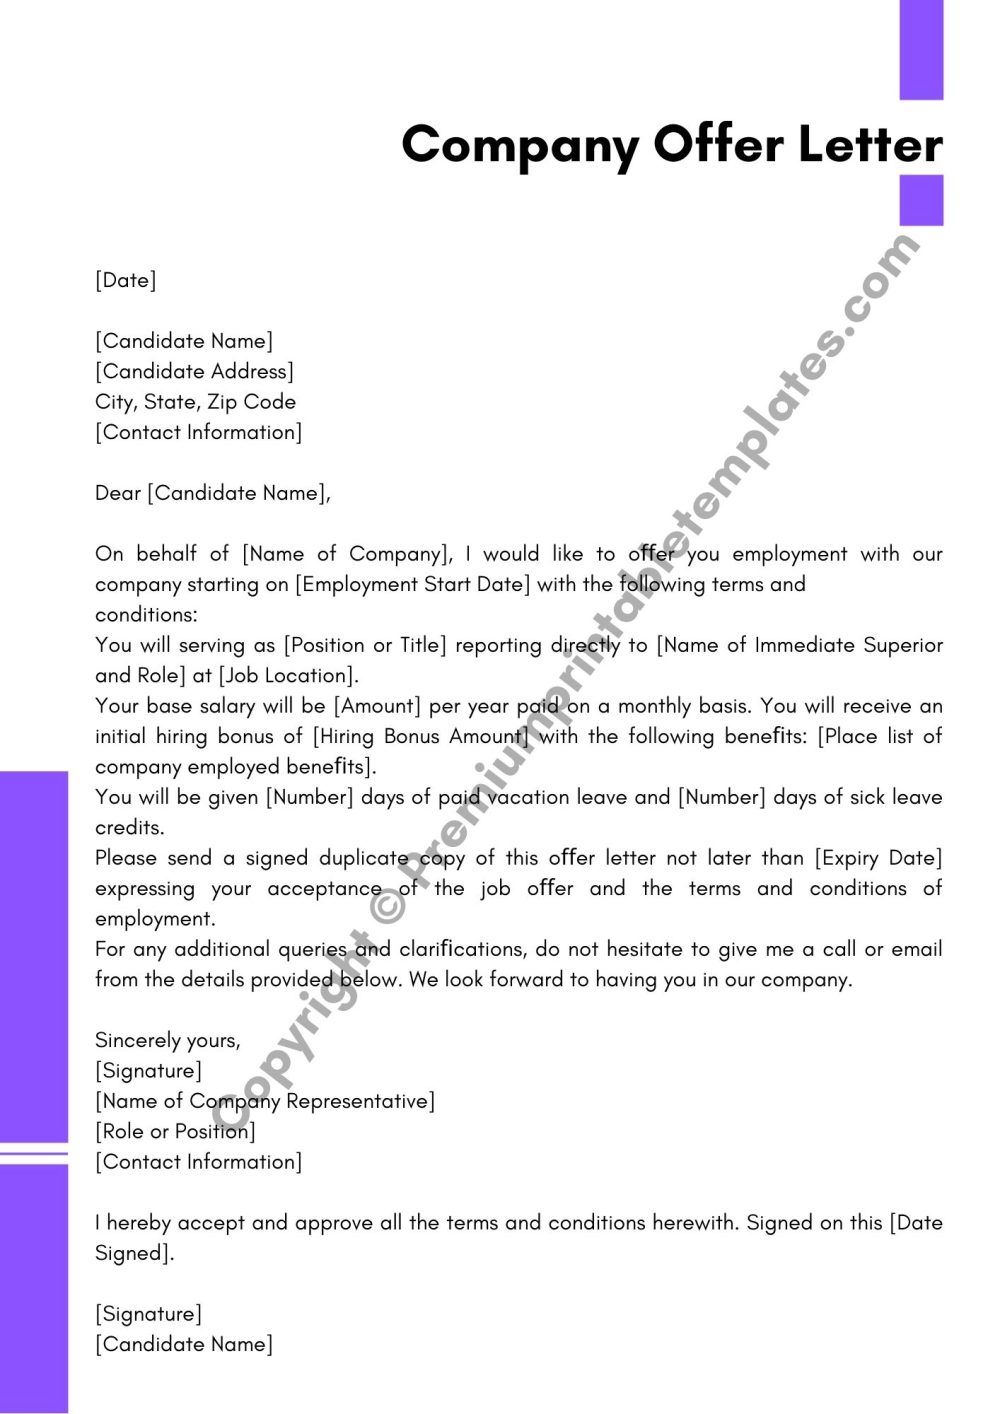 Printable Company Offer Letter